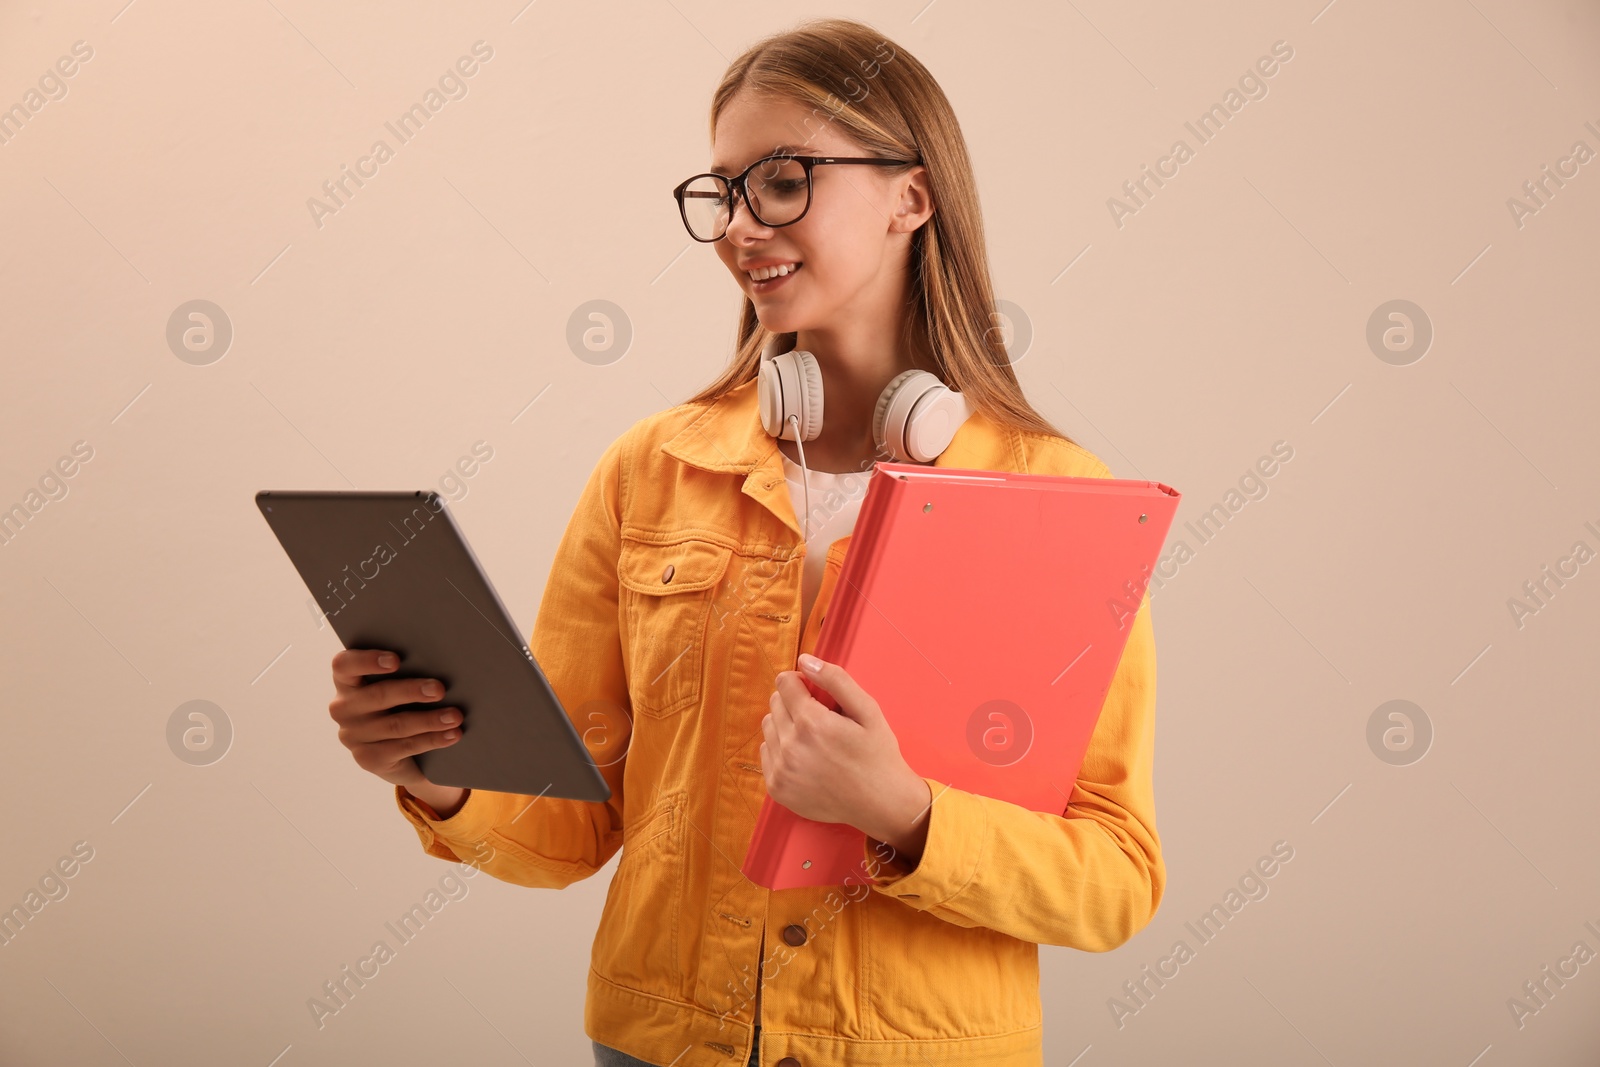 Photo of Teenage student with tablet, folder and headphones on beige background